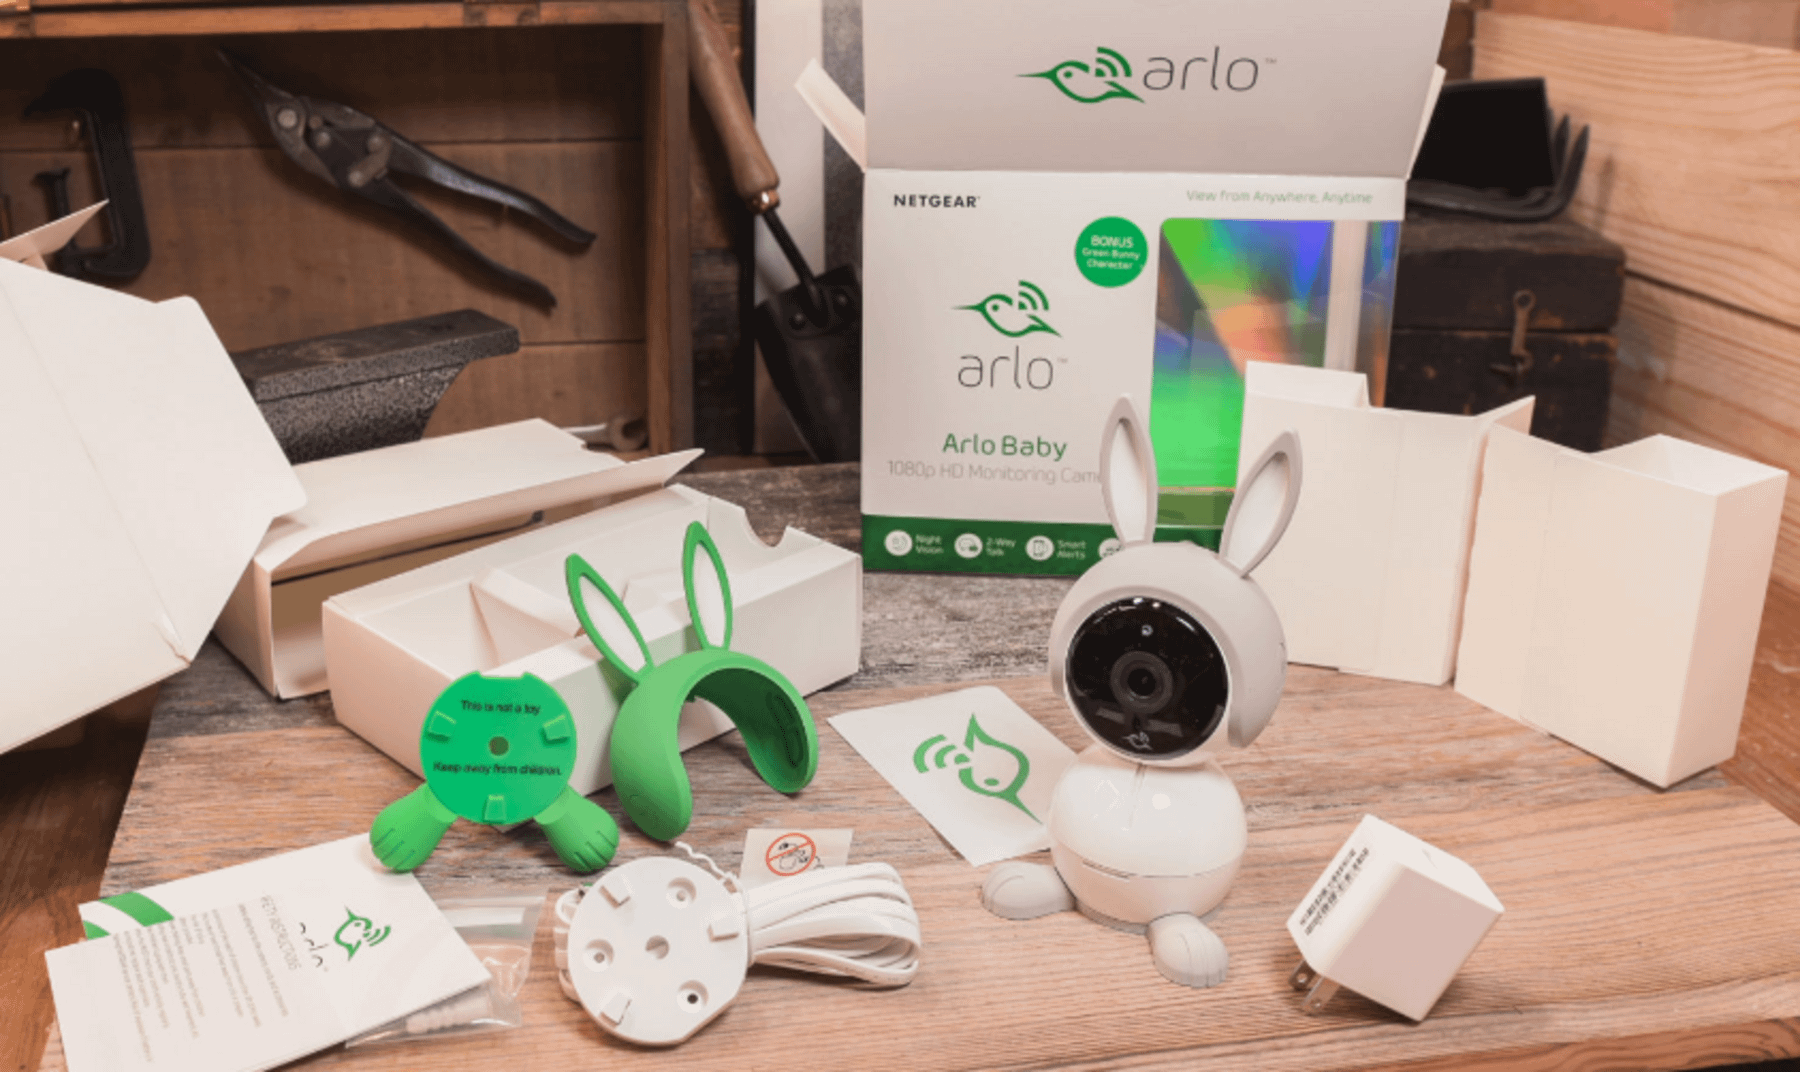 The picture shows the Arlo Baby Monitor and all of its equipment on the table